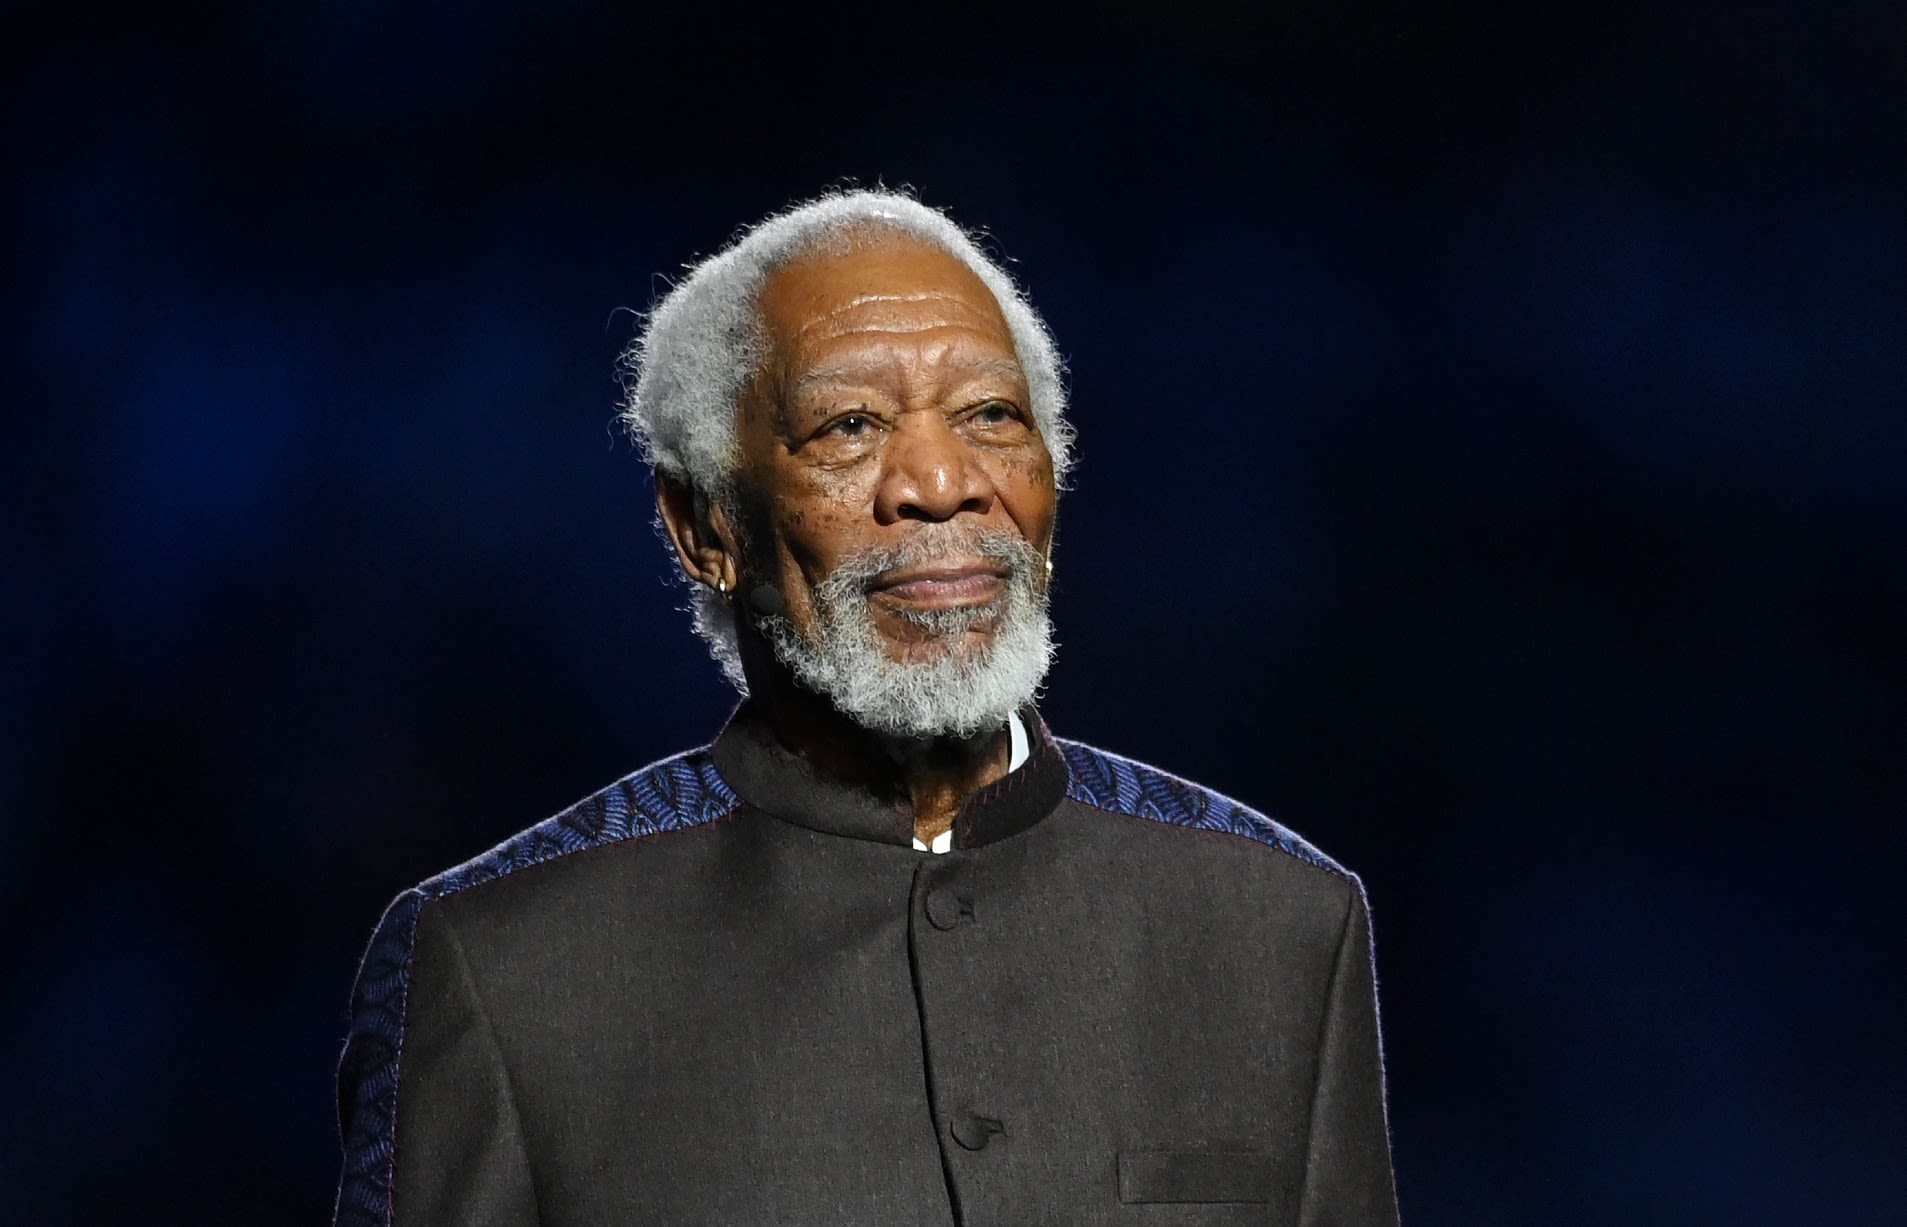 Morgan Freeman, Olivier Marchal, Simone Ashley To Be Feted At The Monte-Carlo TV ...